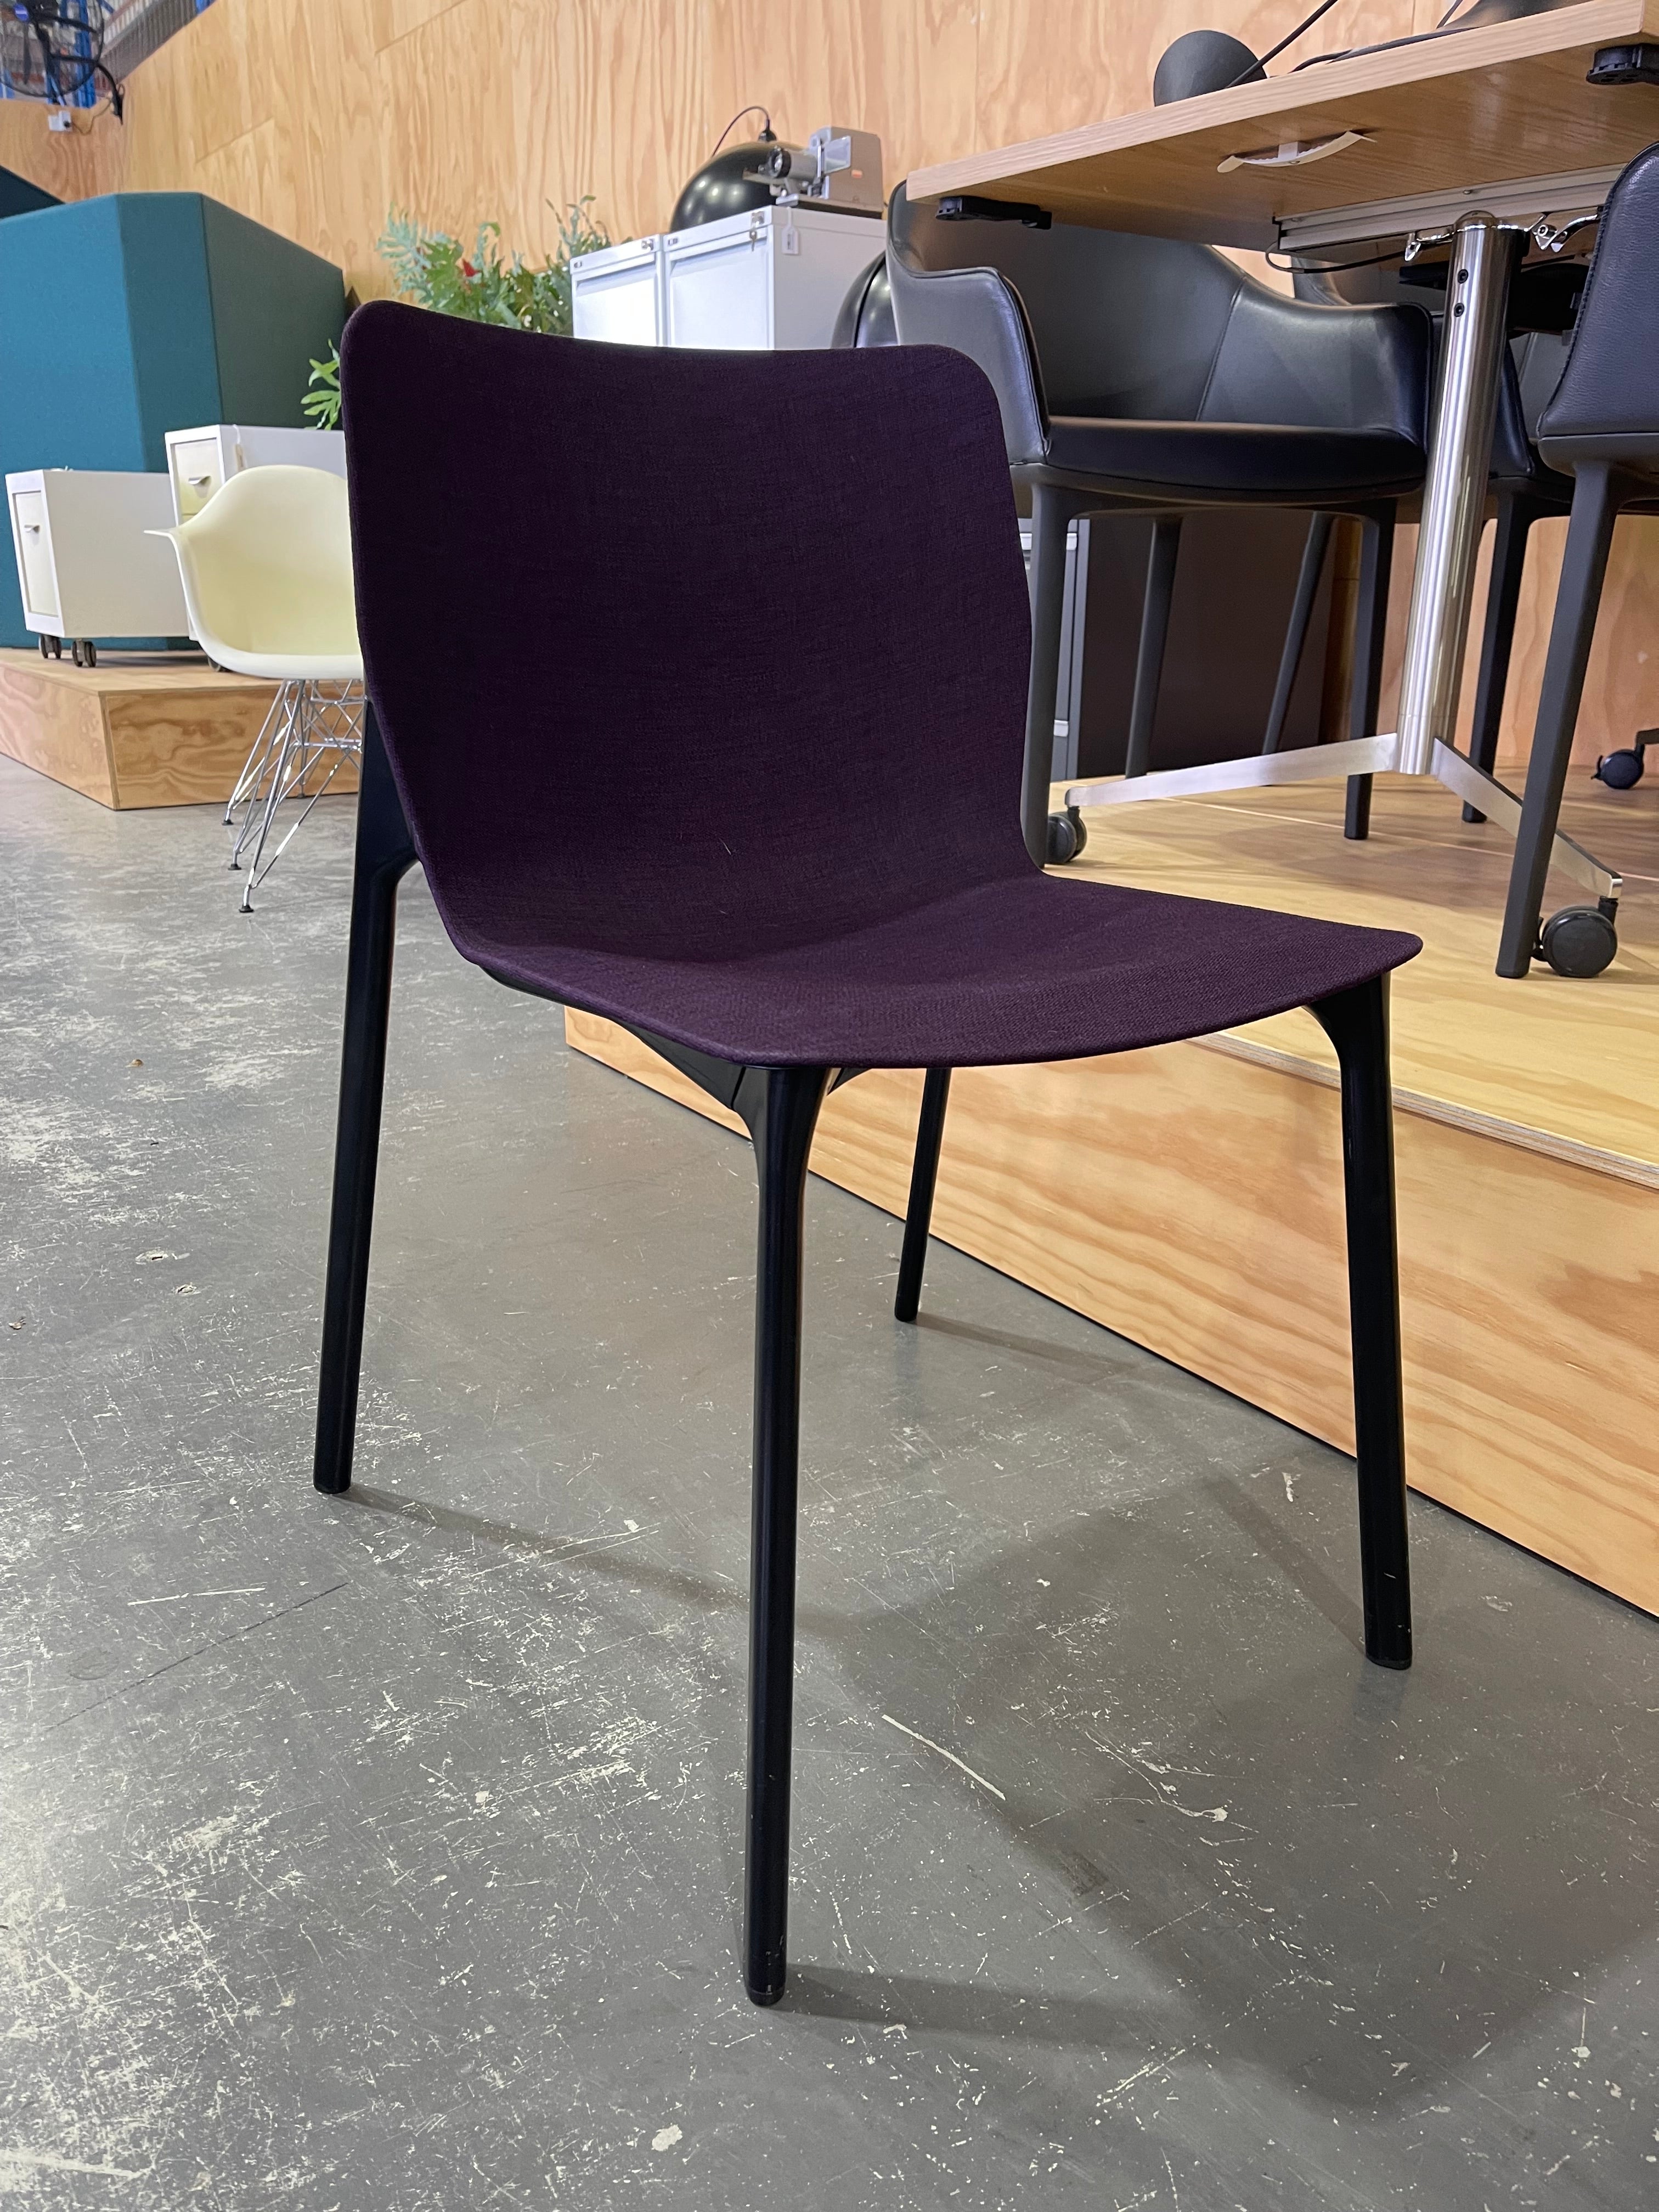 Wilkhahn Vitra Herman Miller Premium Luxury Designer Chairs for dining meeting conference home office restaurant hospitality break lunch rooms and much more authentic genuine original Melbourne Australia